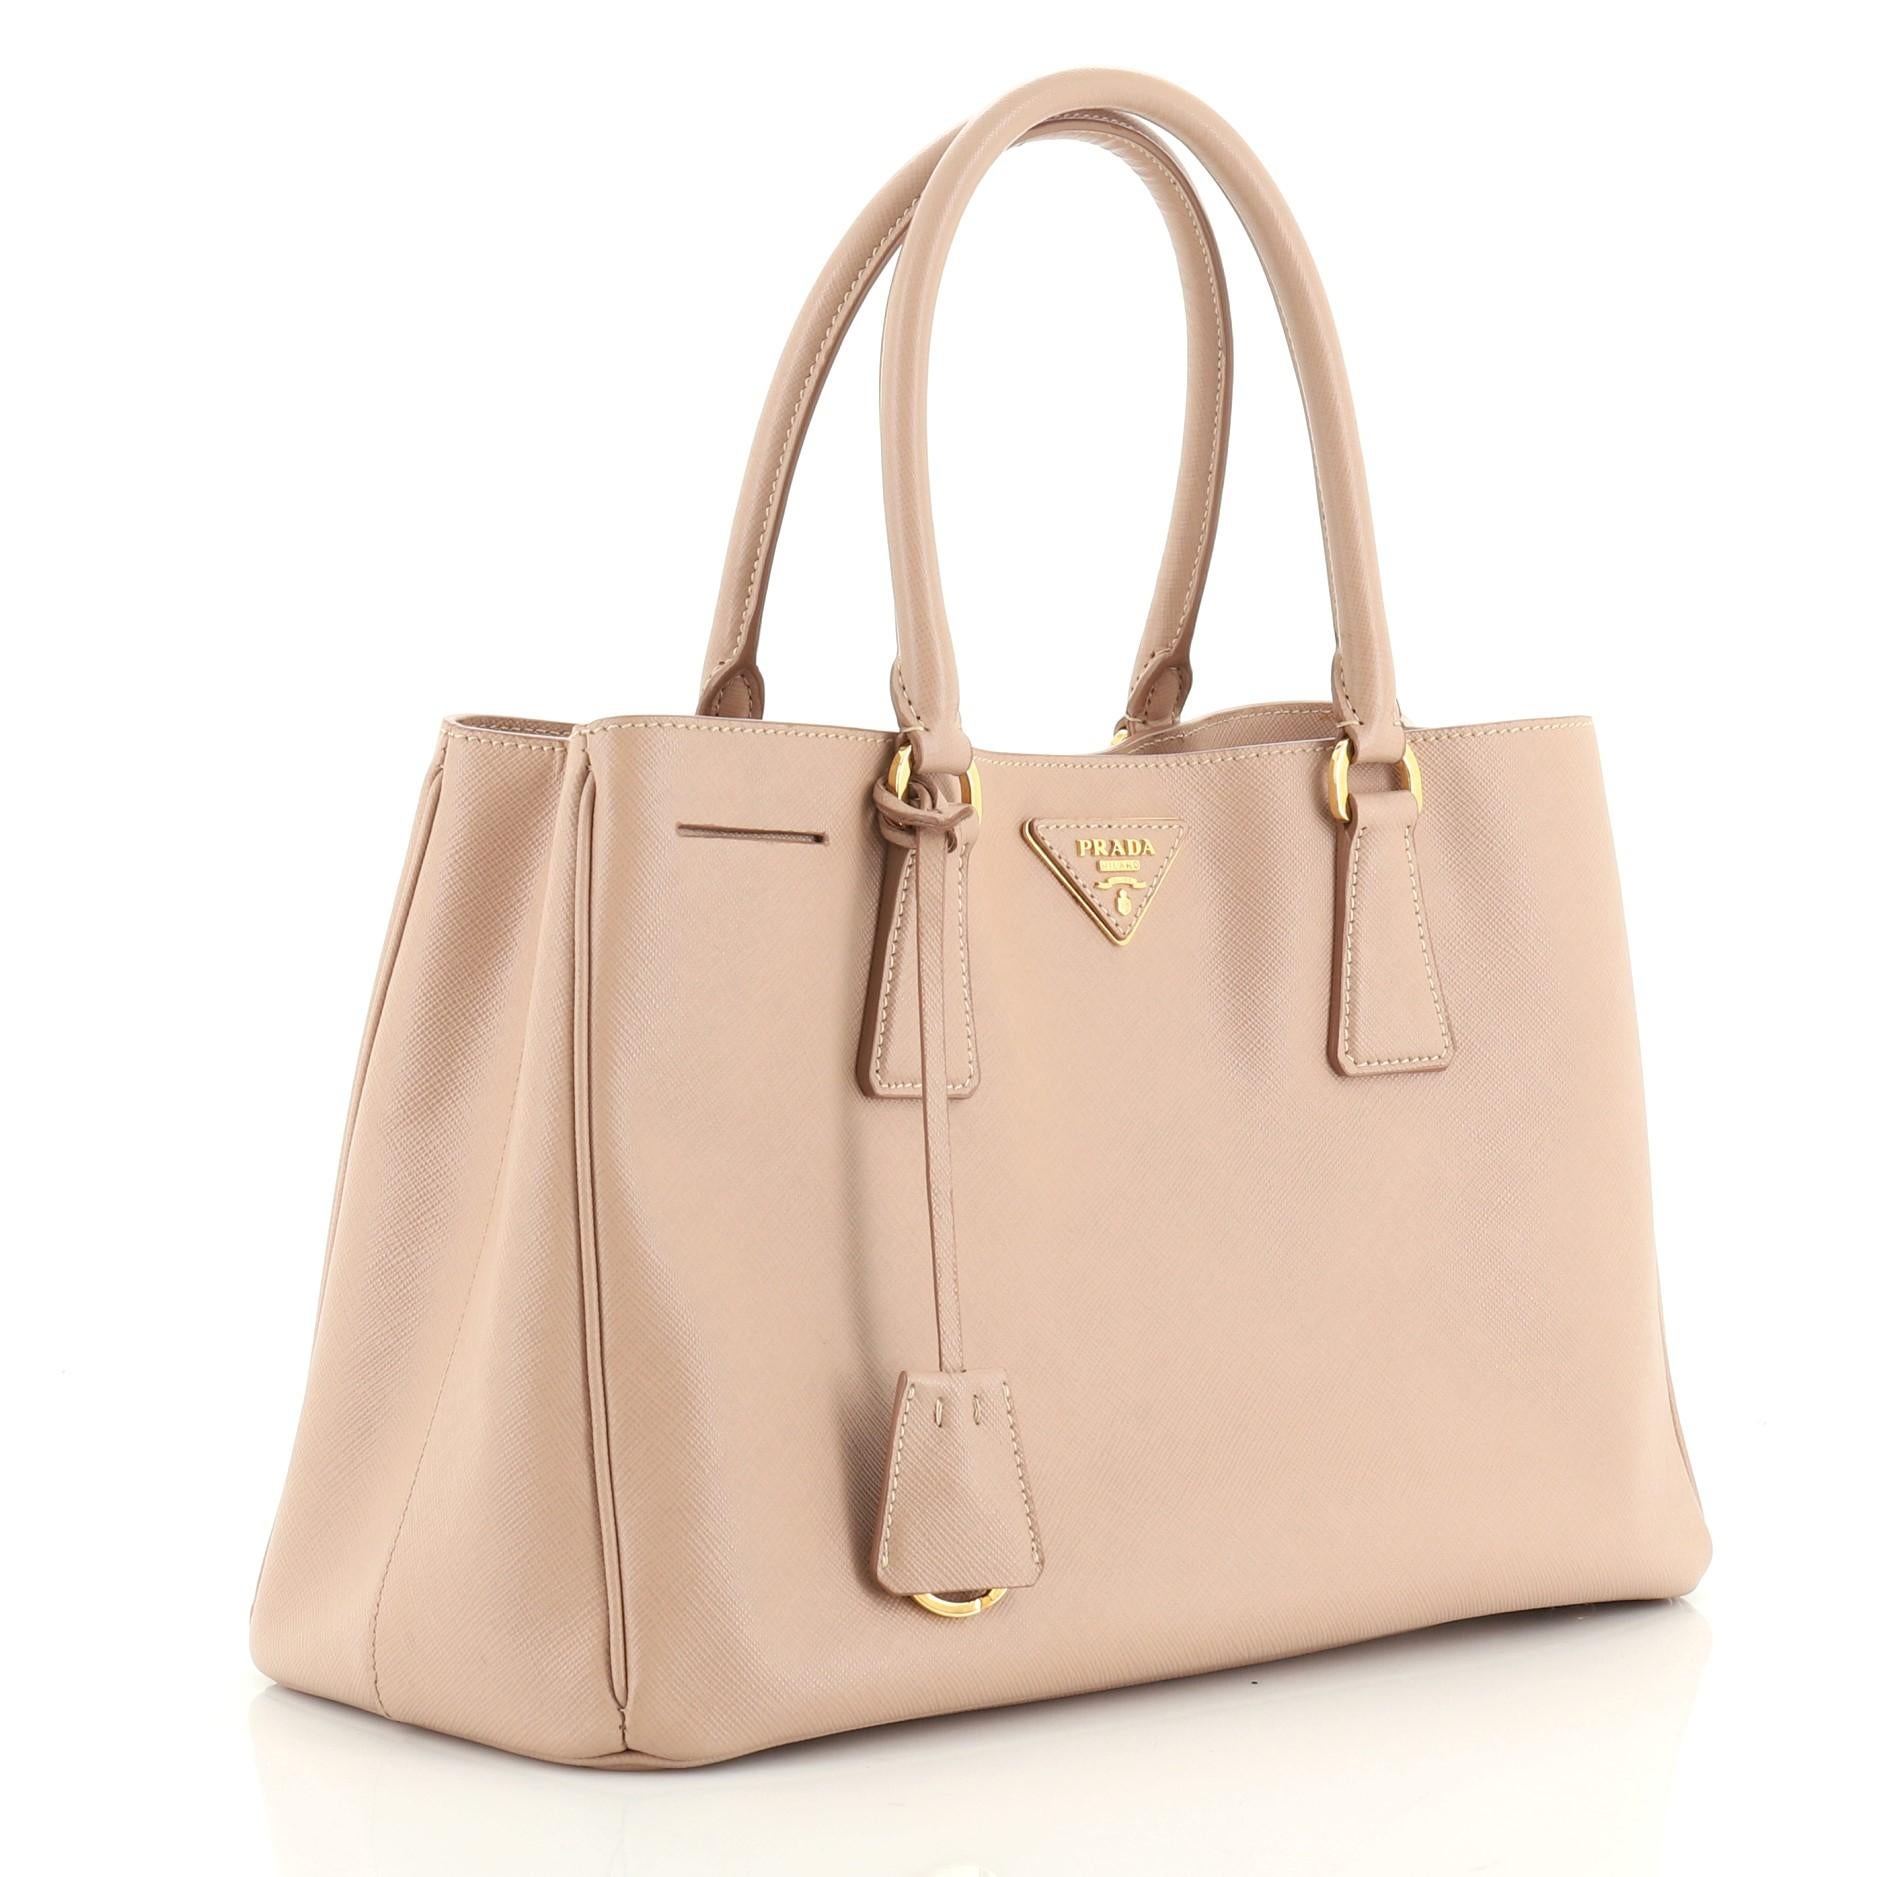 This Prada Lux Open Tote Saffiano Leather Small, crafted from neutral saffiano leather, features dual rolled handles, side snap buttons, protective base studs, and gold-tone hardware. Its magnetic snap closure opens to a brown fabric interior with